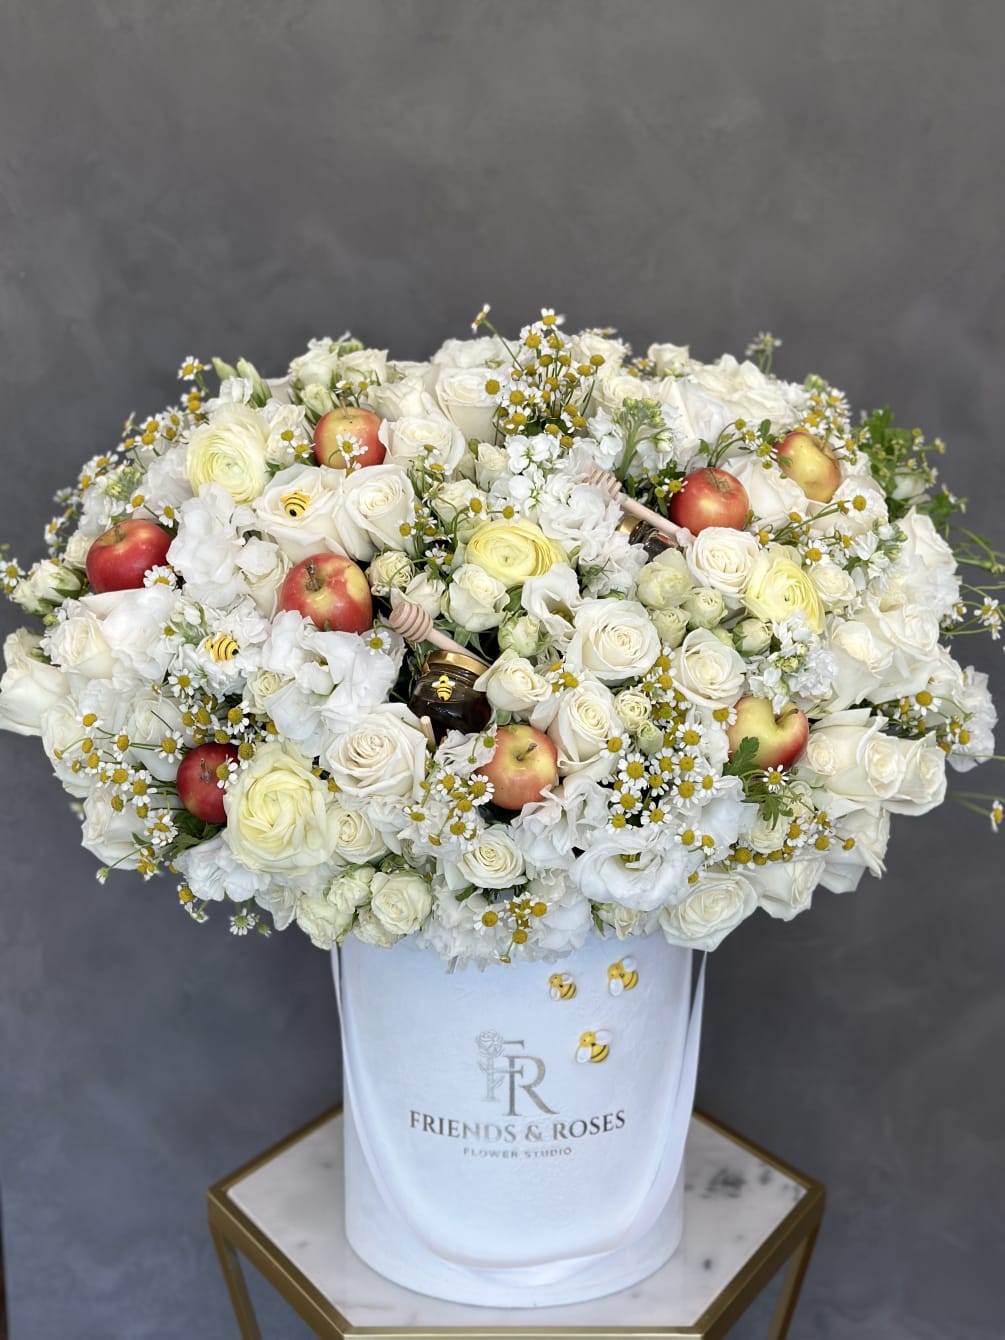 Festive arrangement of white flowers, fresh apples, and honey in our signature